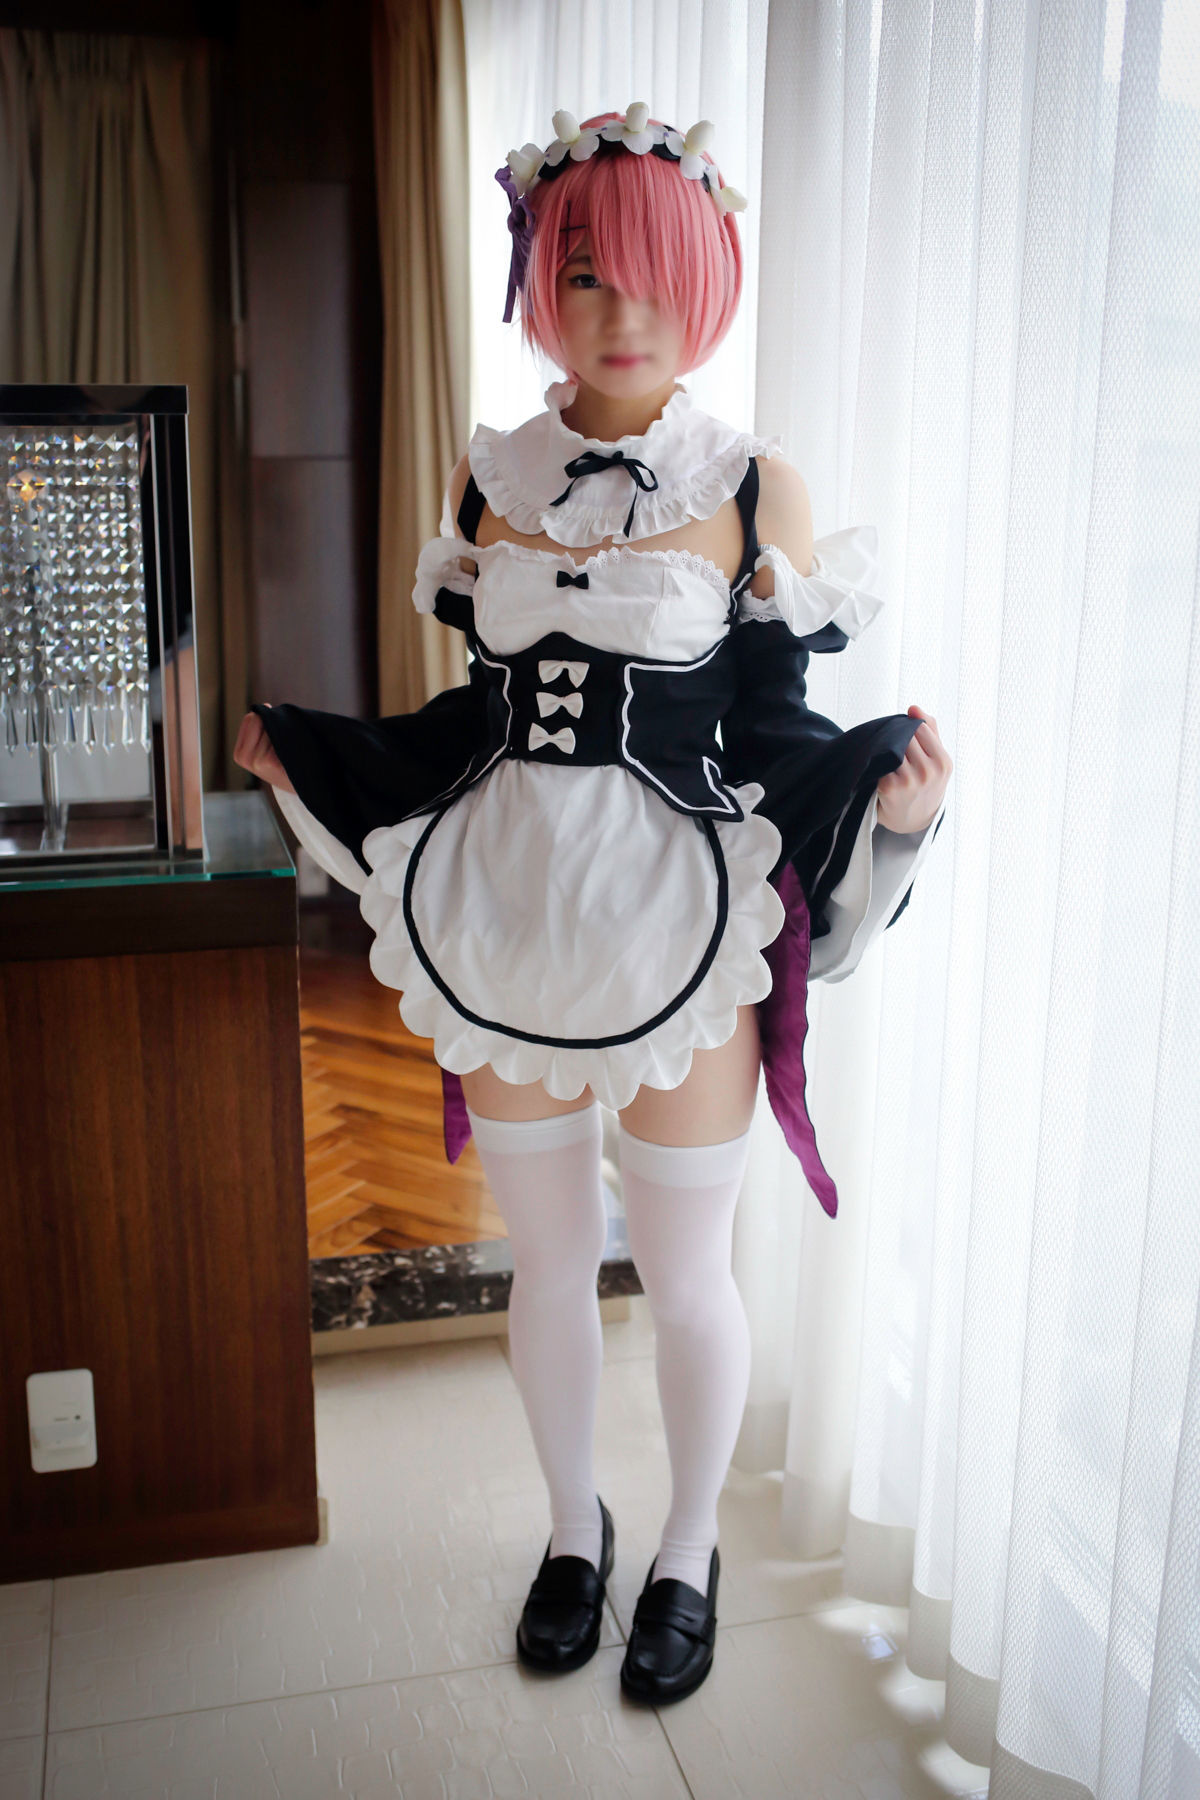 Naughty non REM ero Cosplay twin sister(4)